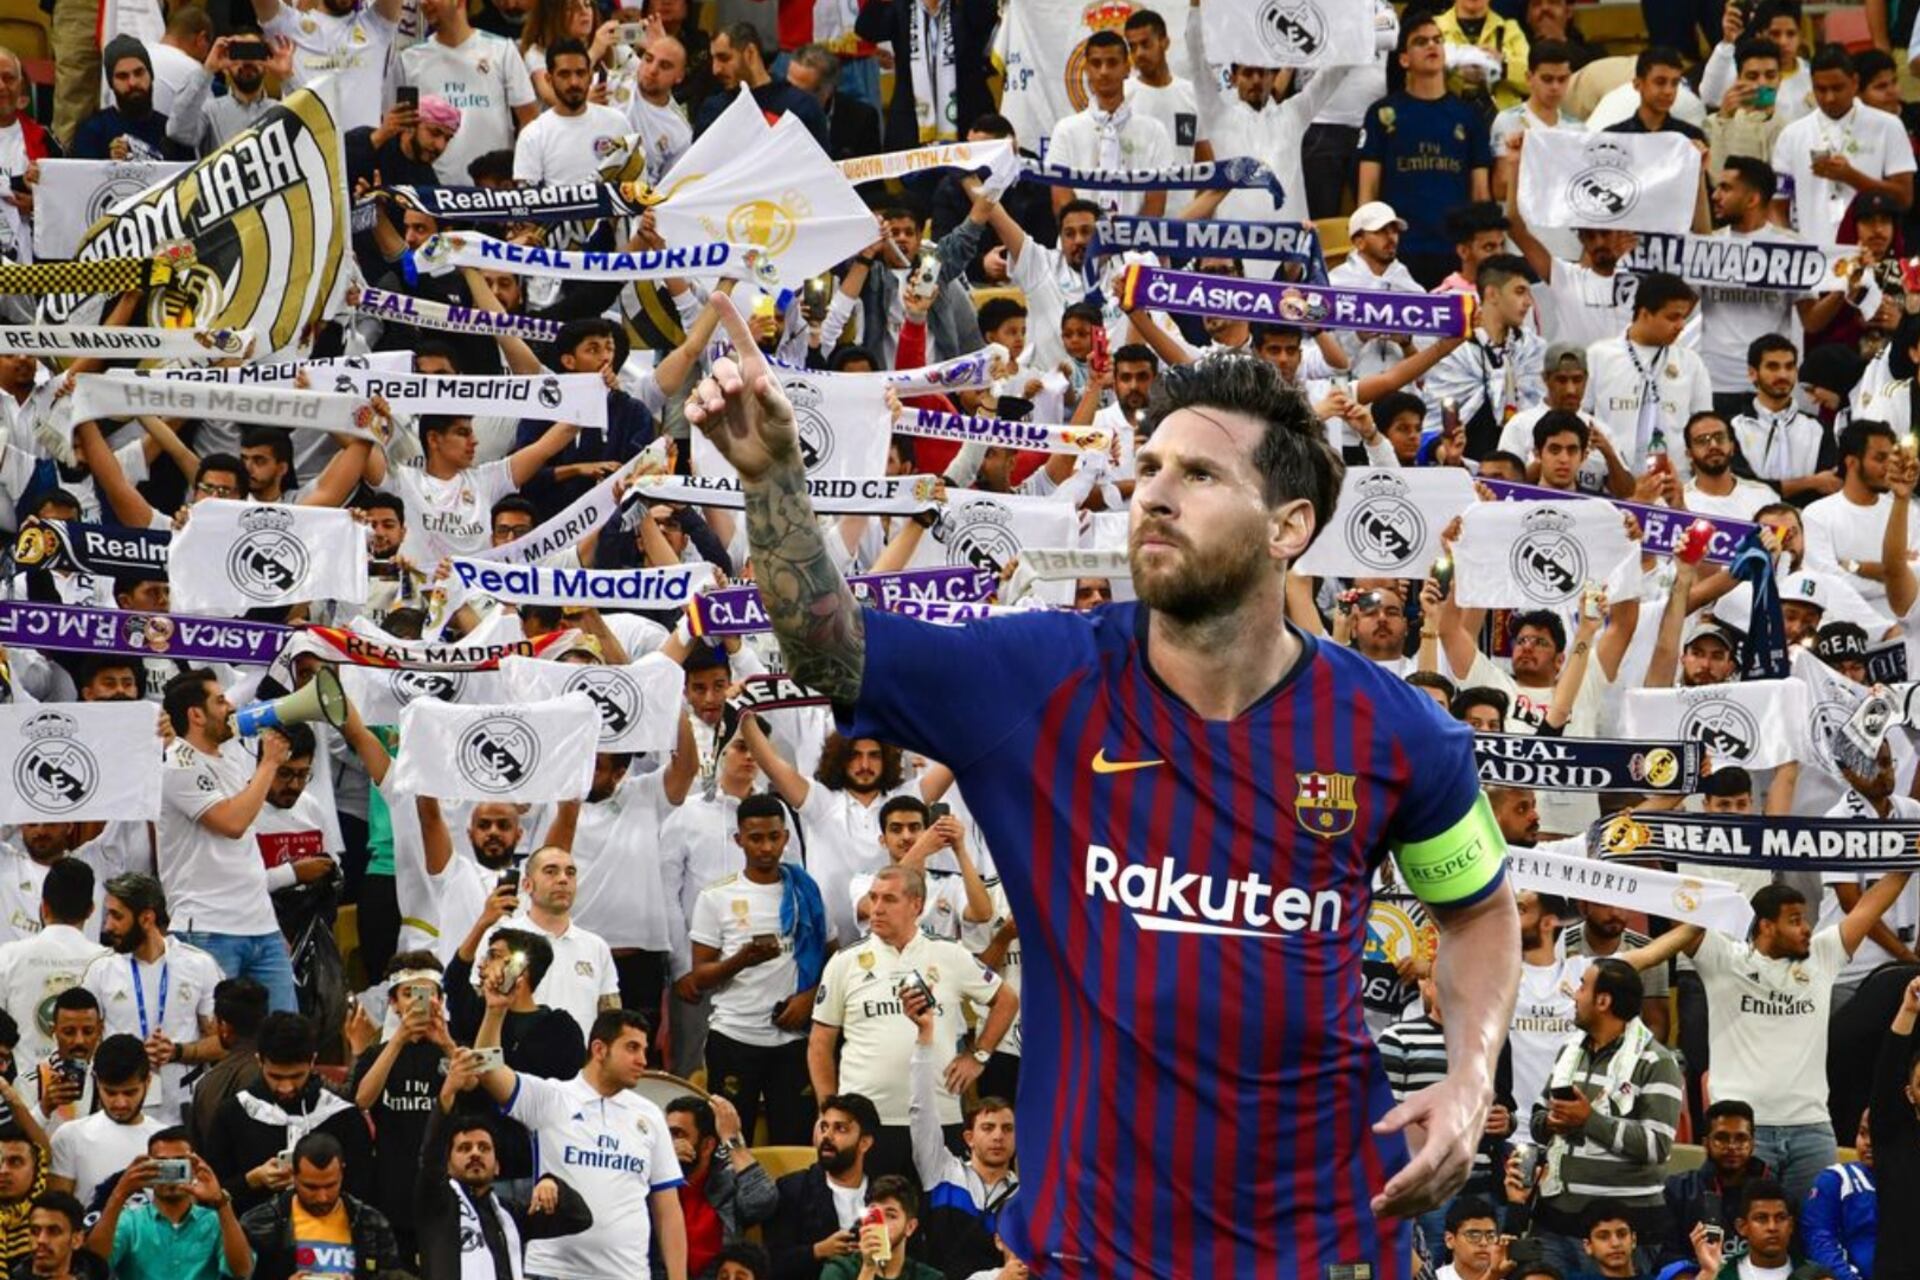 (VIDEO) Real Madrid fans remembered about Messi before the Champions League match, the harsh chants they sang about him